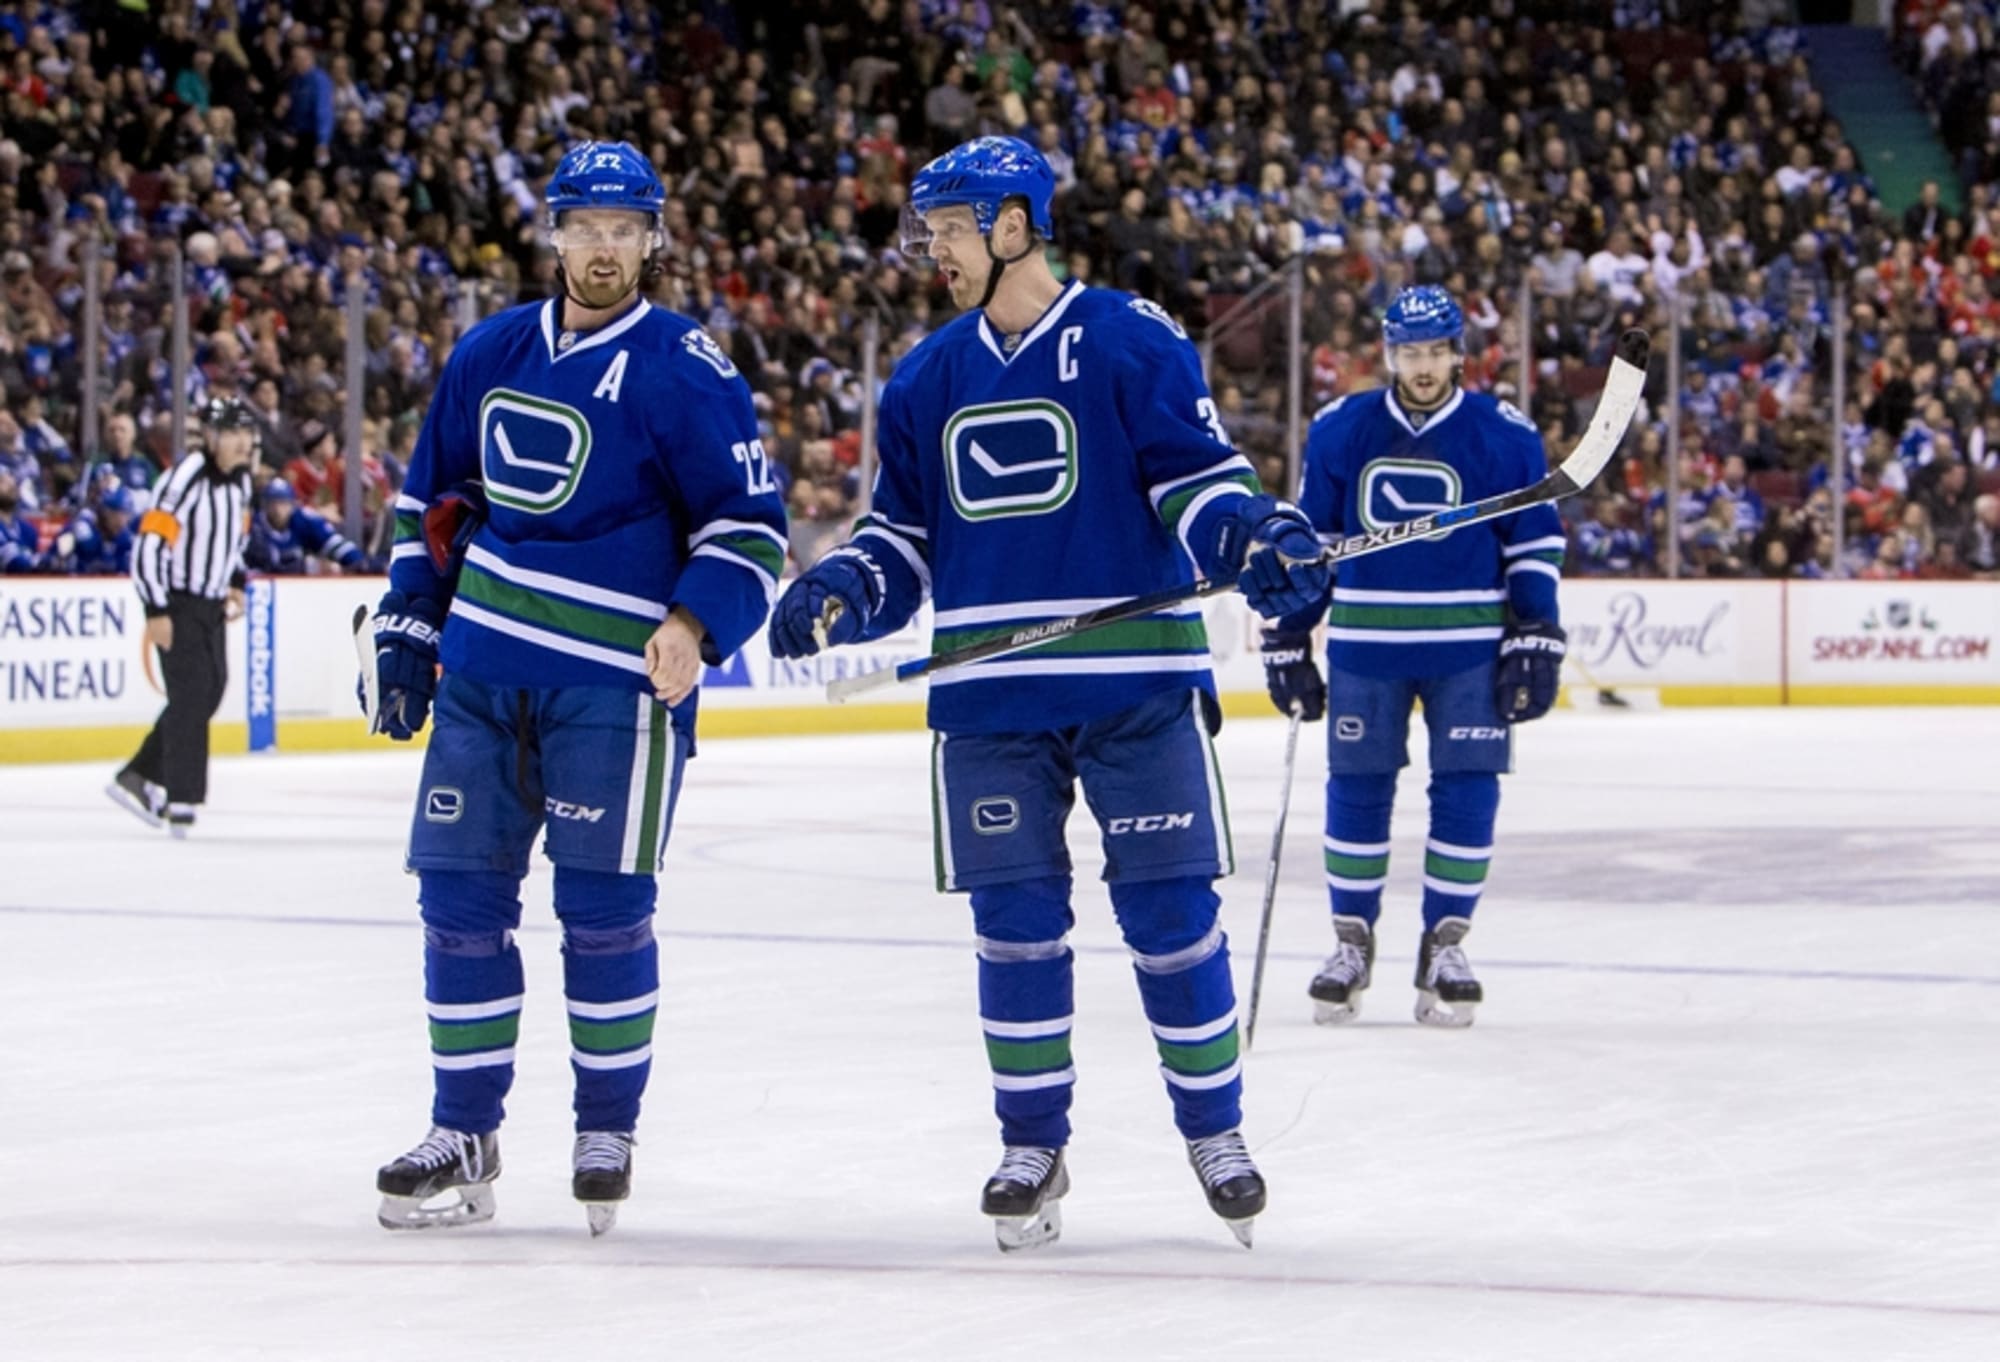 Vancouver Canucks: Sedins Not Owed Another Stanley Cup Run